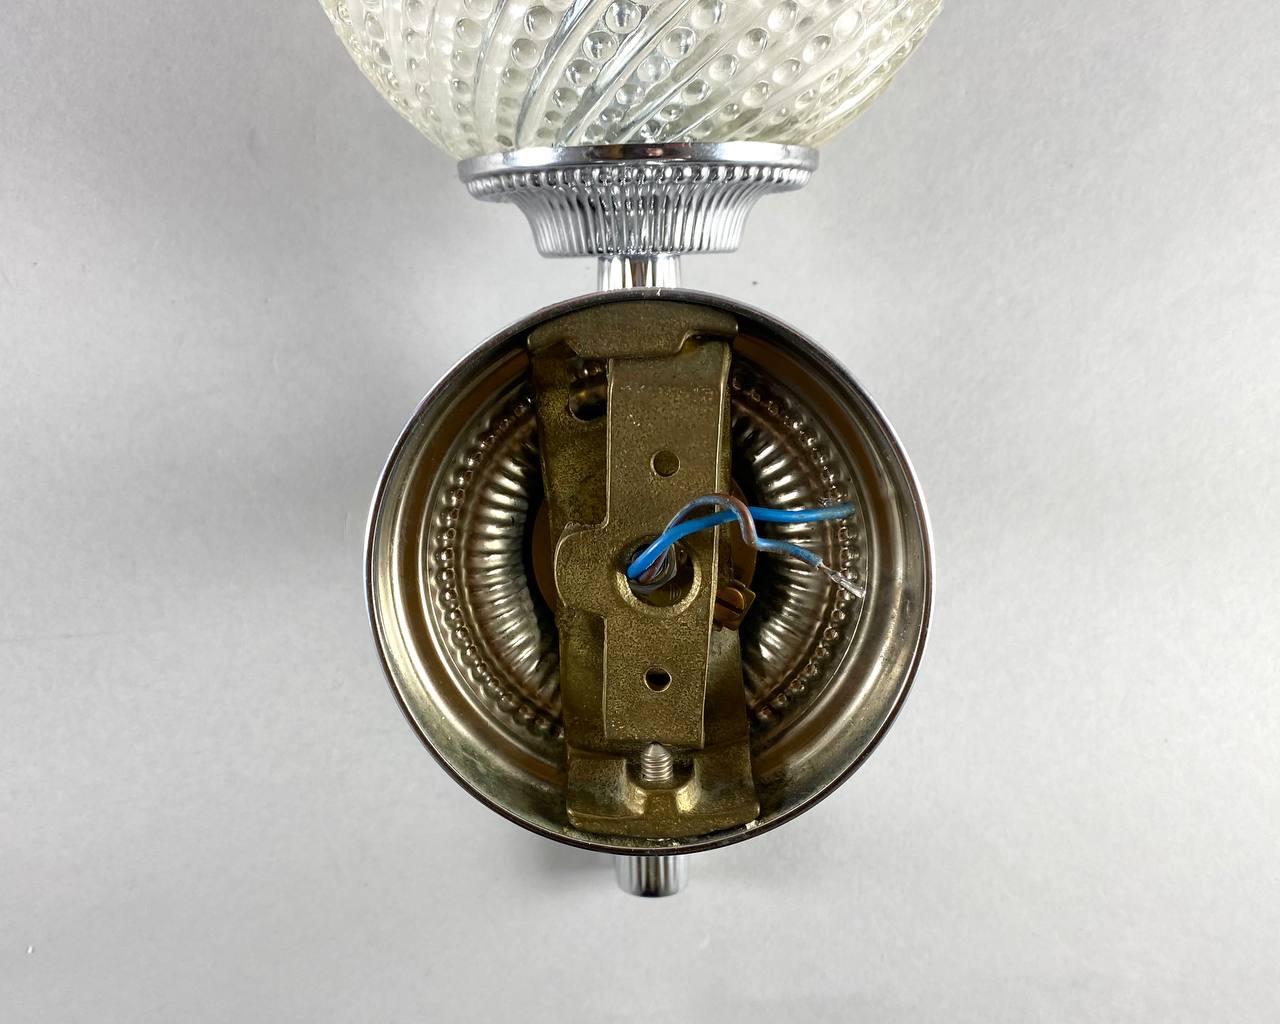 Vintage art deco style wall sconce in chrome plated brass with glass shade creates a perfect combination.

The round lampshade is made of thick transparent glass with tiny bubbles.

There are original plugs for wall mounting on the back.

To